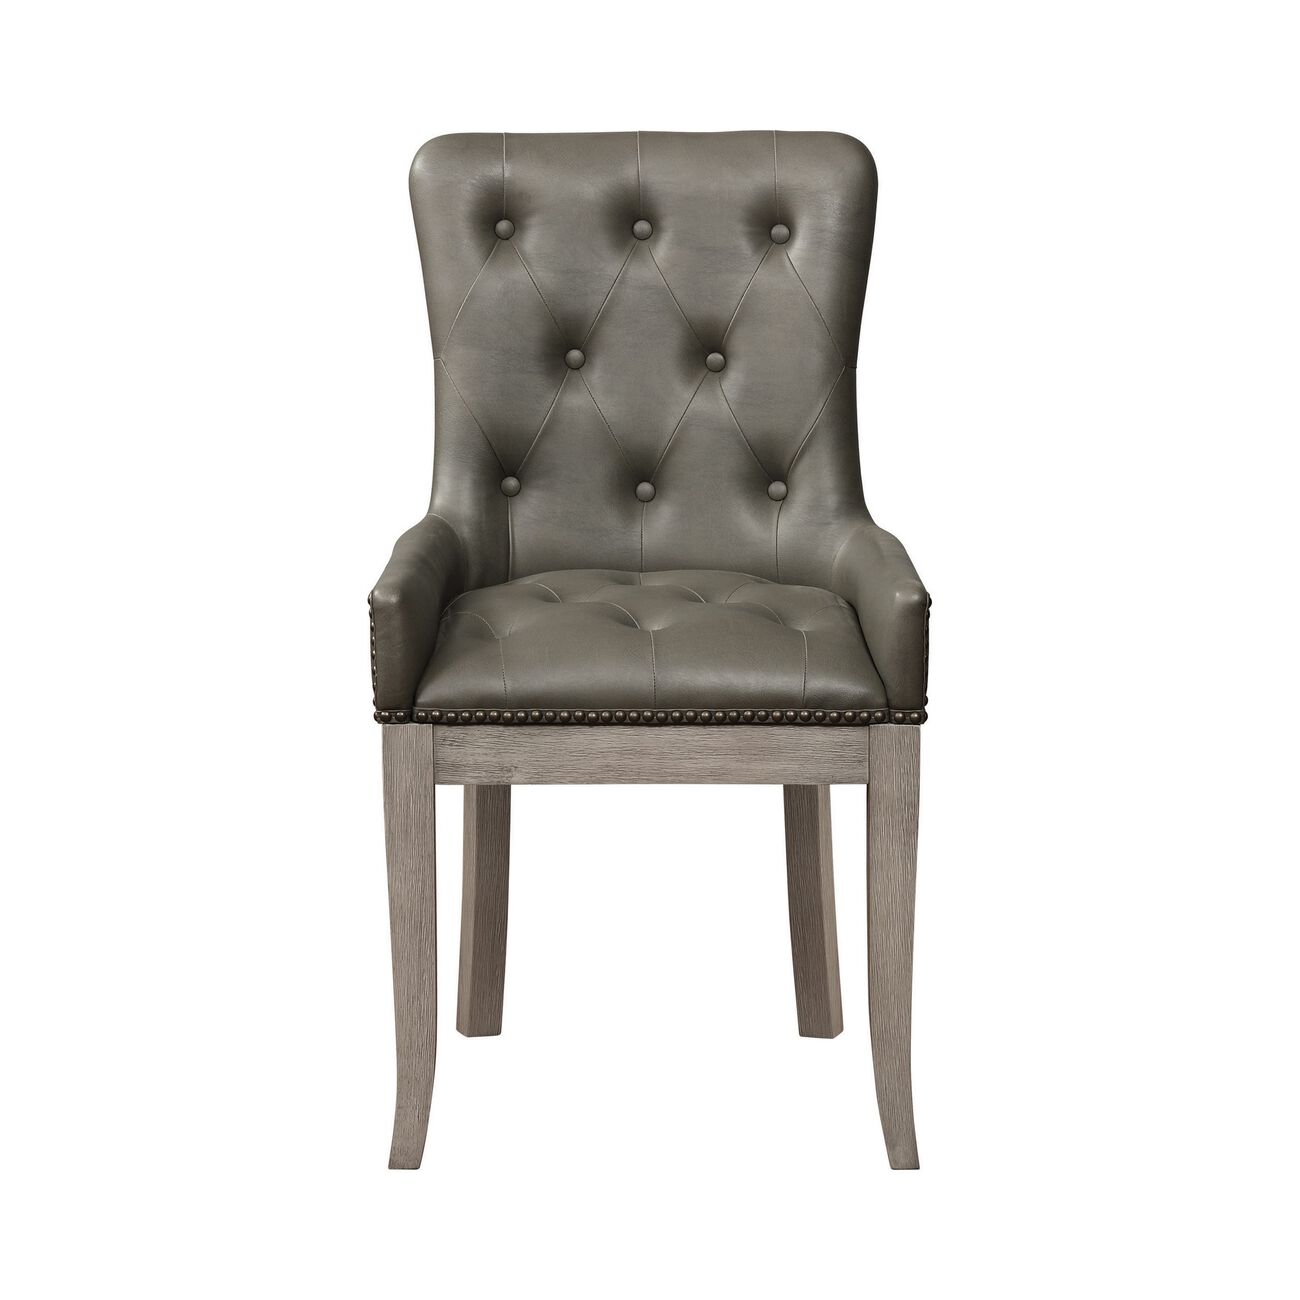 Button Tufted Leatherette Dining Chair with Low Profile Arms, Set of 2,Gray